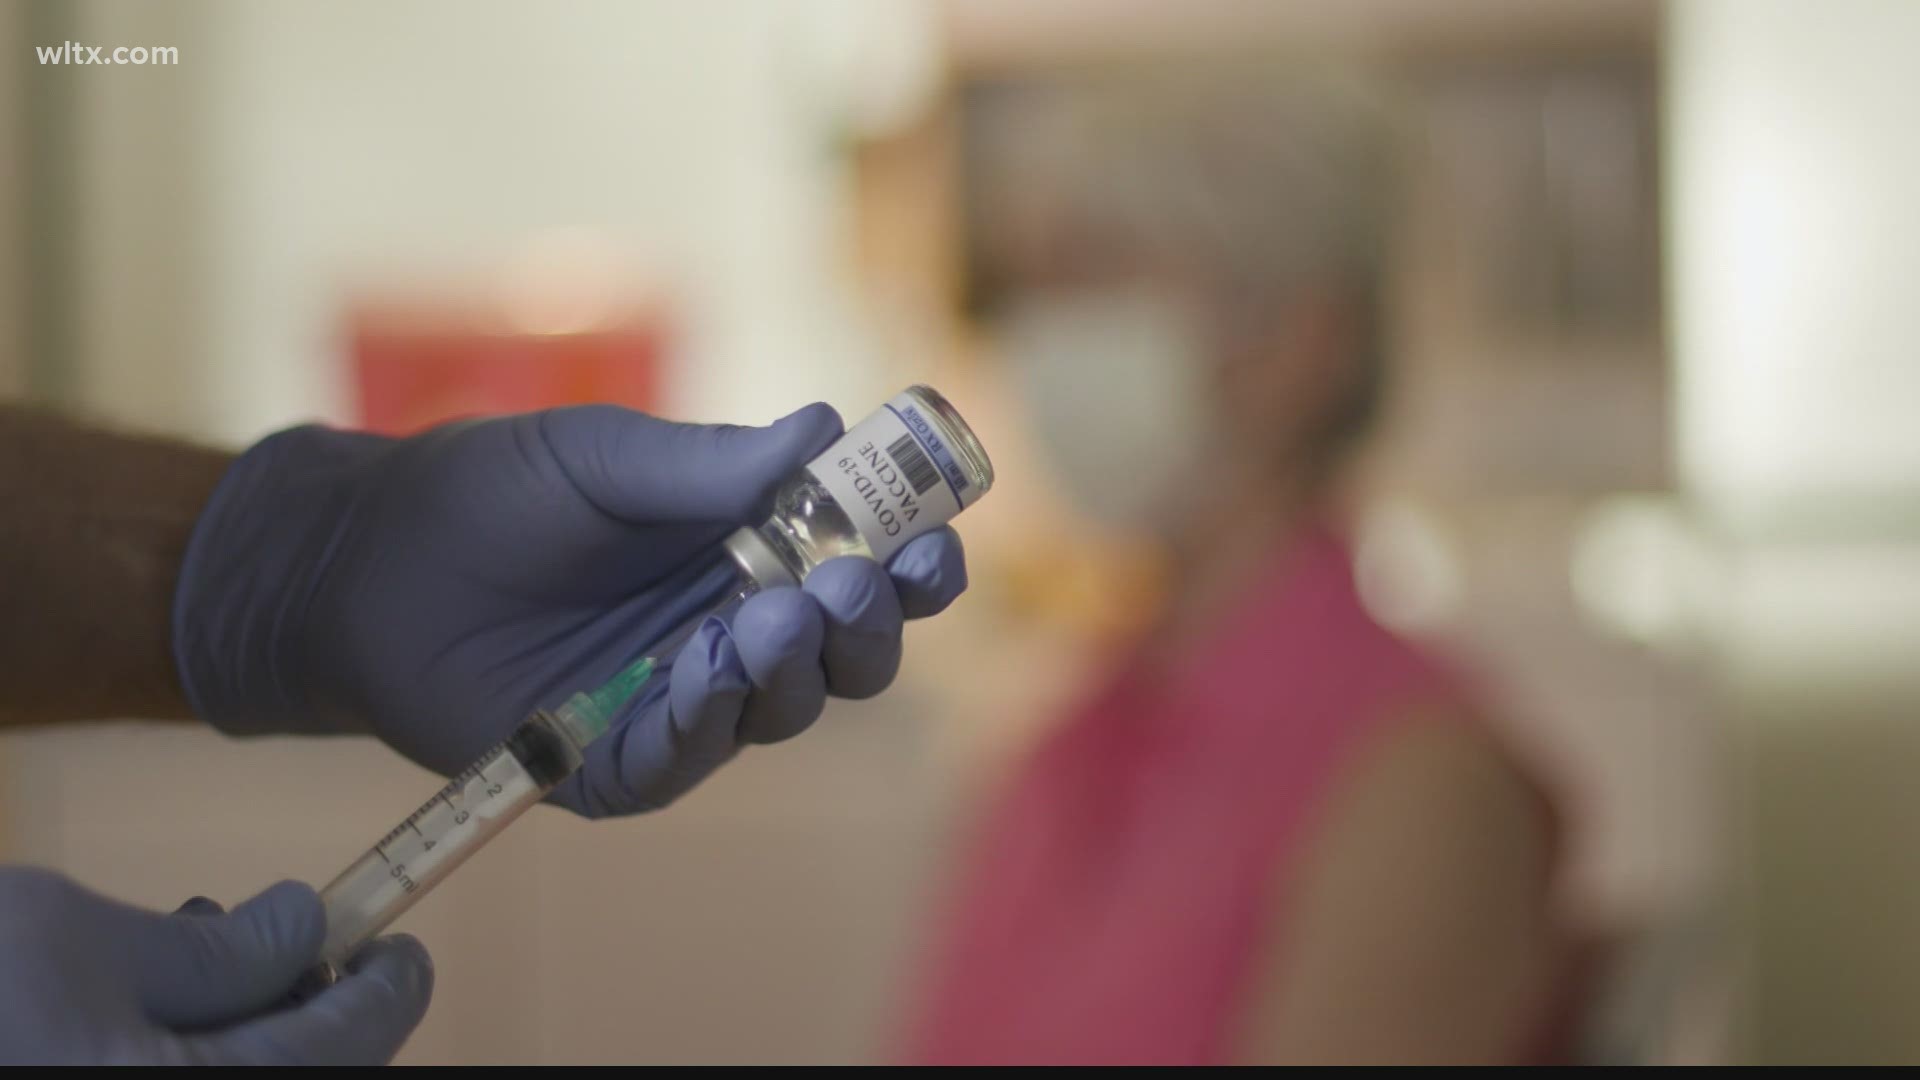 There are sites all over the state administering the vaccine to those in Phase 1a.